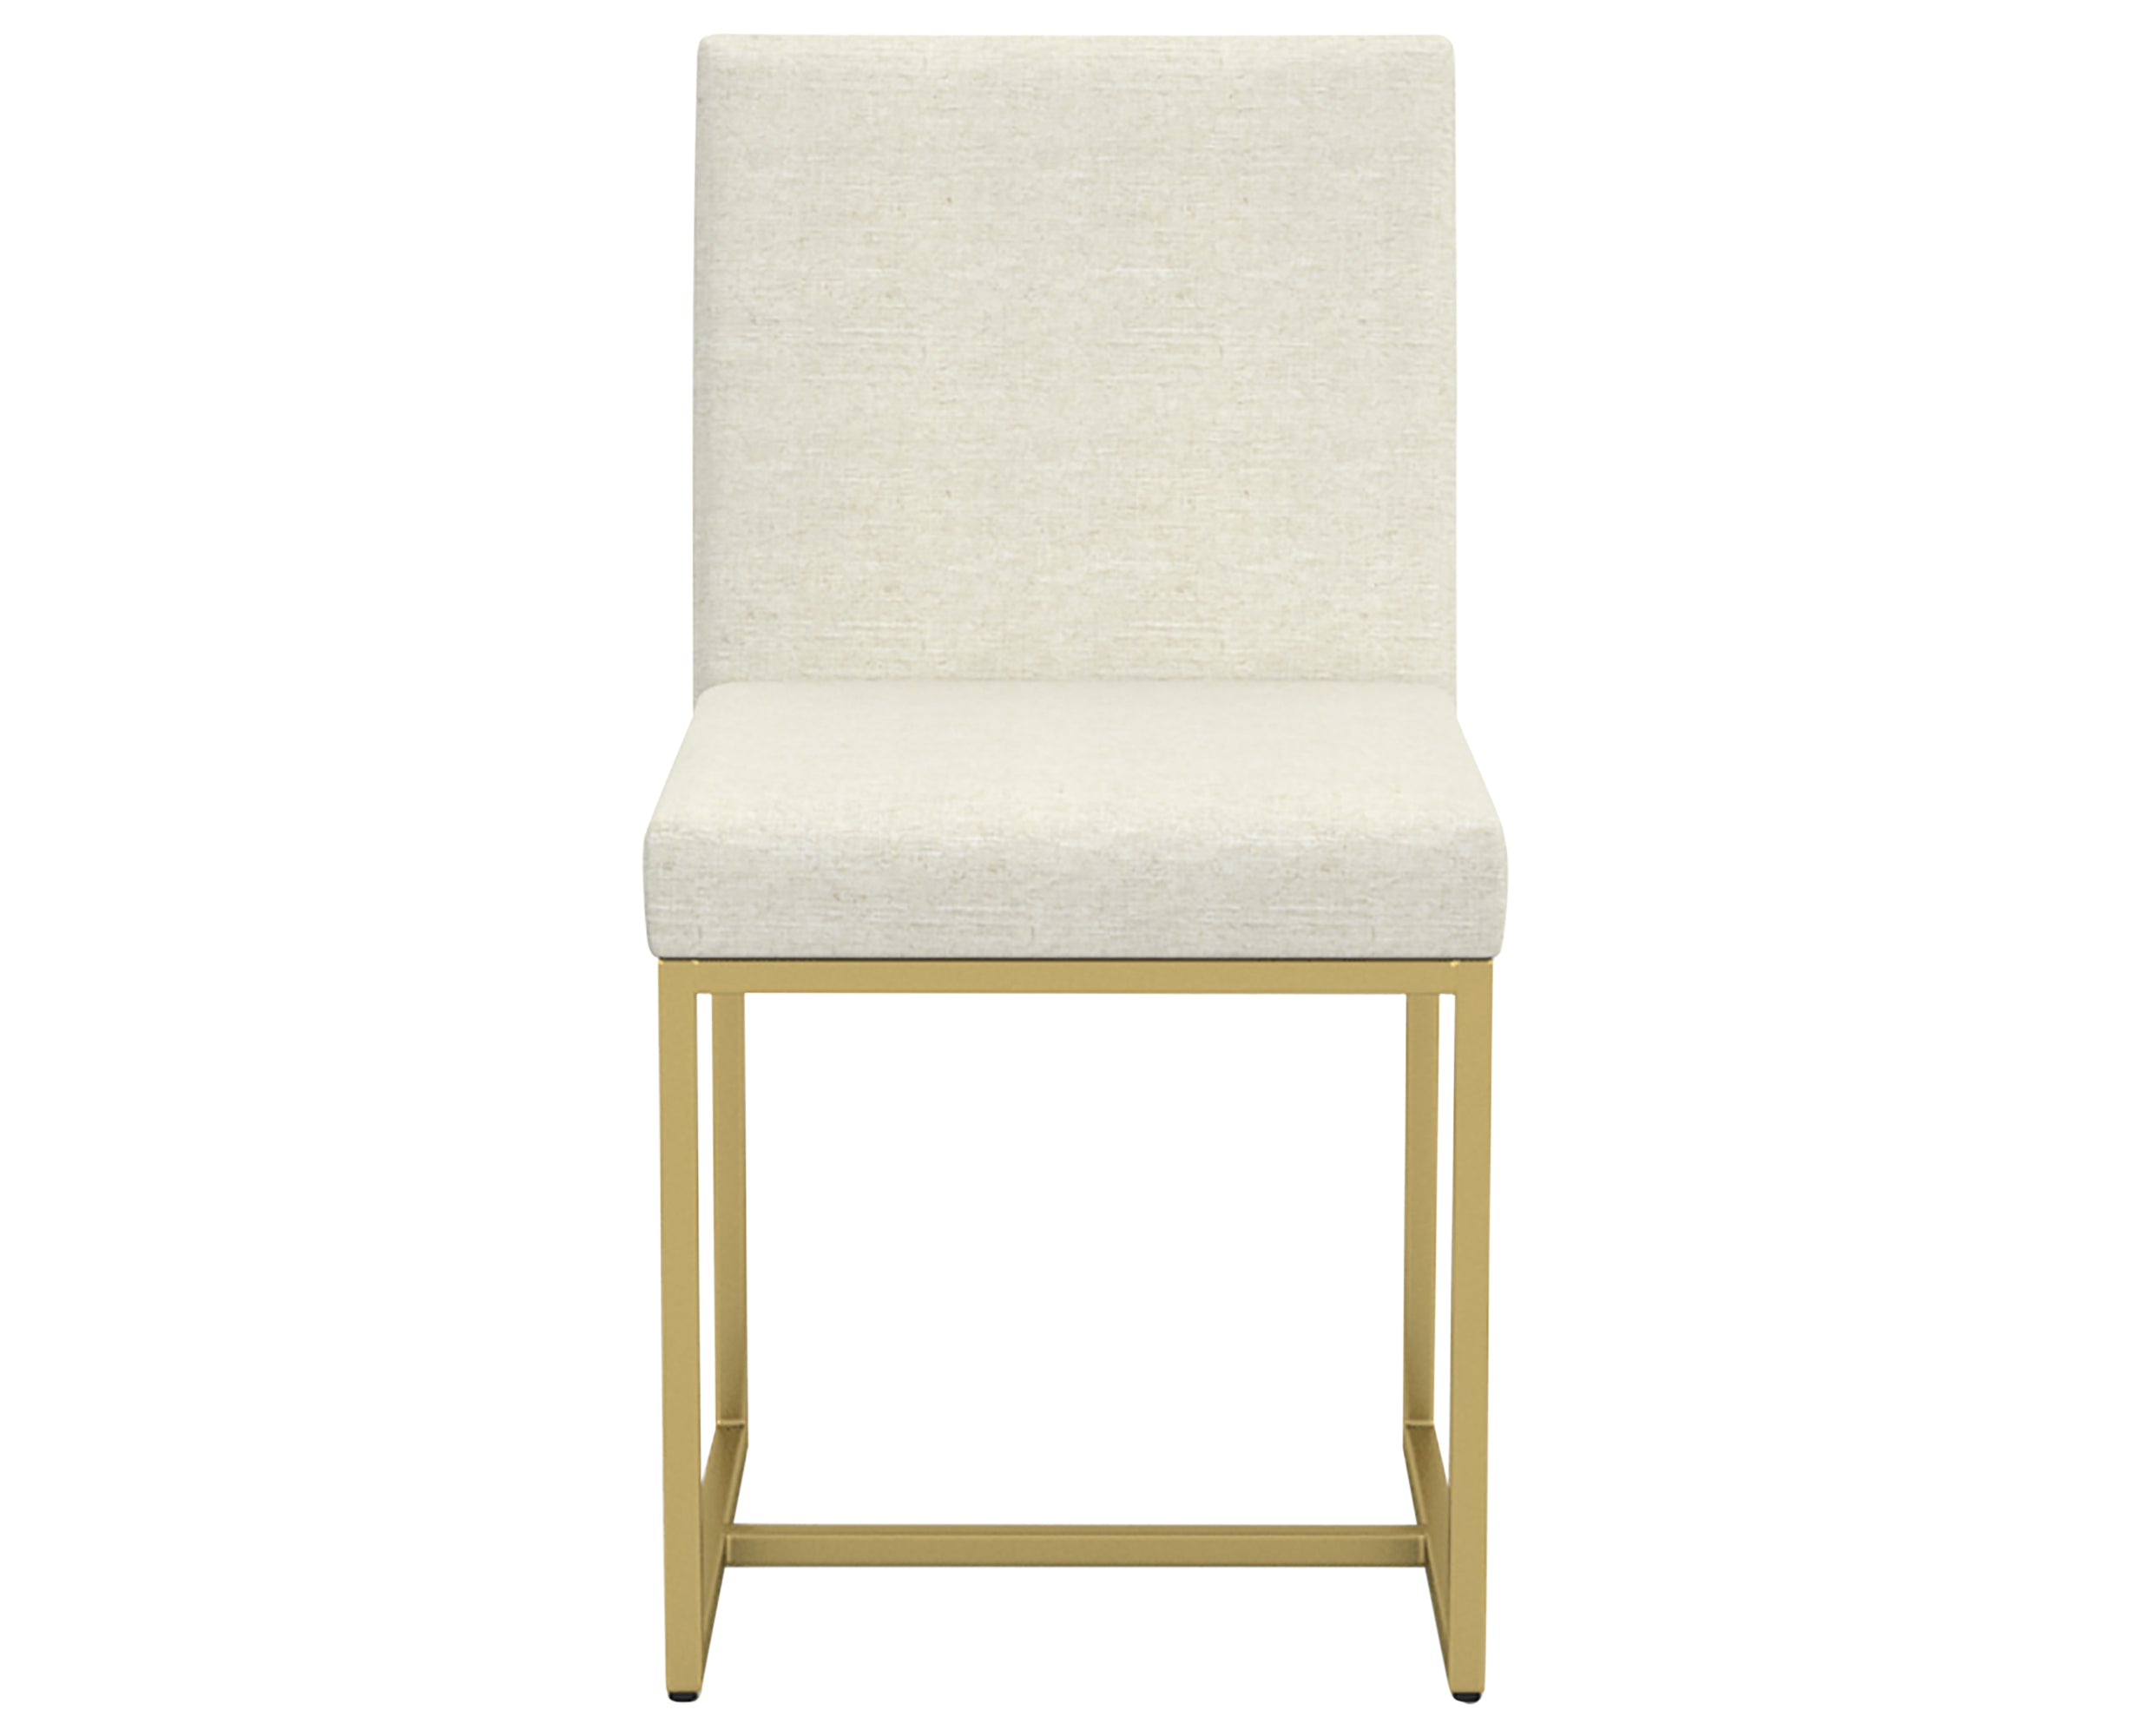 GL Metal Gold &amp; Fabric TW | Canadel Modern Dining Chair 5174 | Valley Ridge Furniture